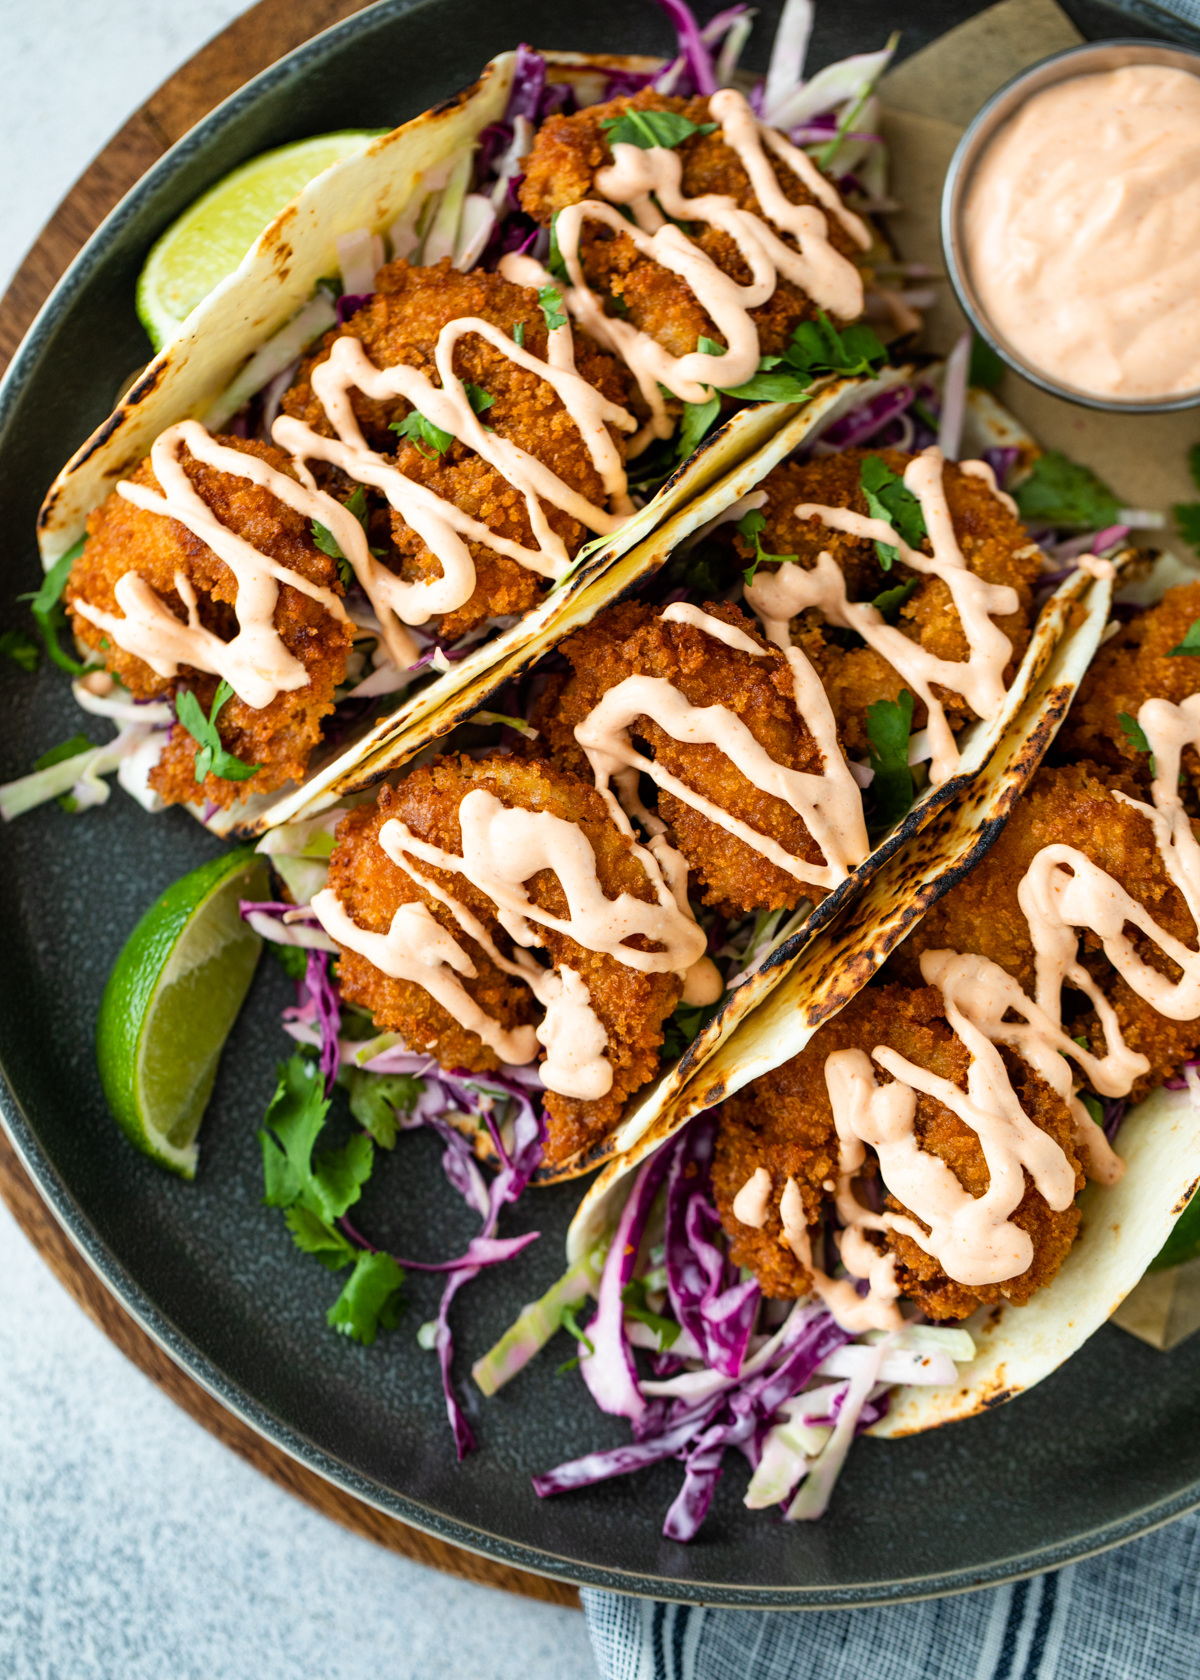 Mexican Fried Tacos Recipe